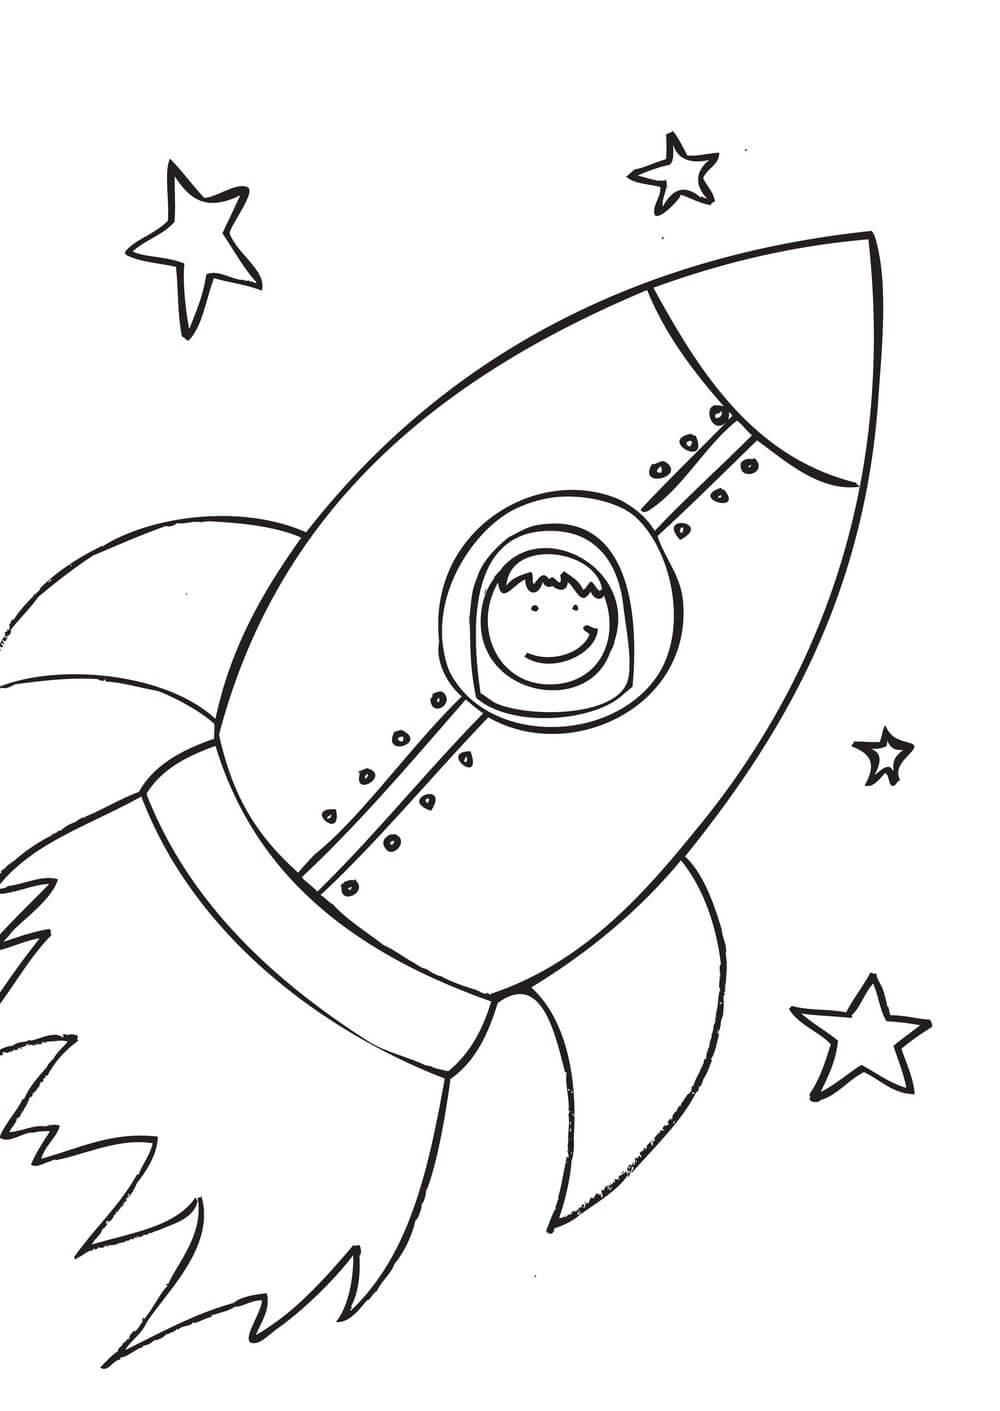 Long Rocket Ship Coloring Page - Free Printable Coloring Pages for Kids